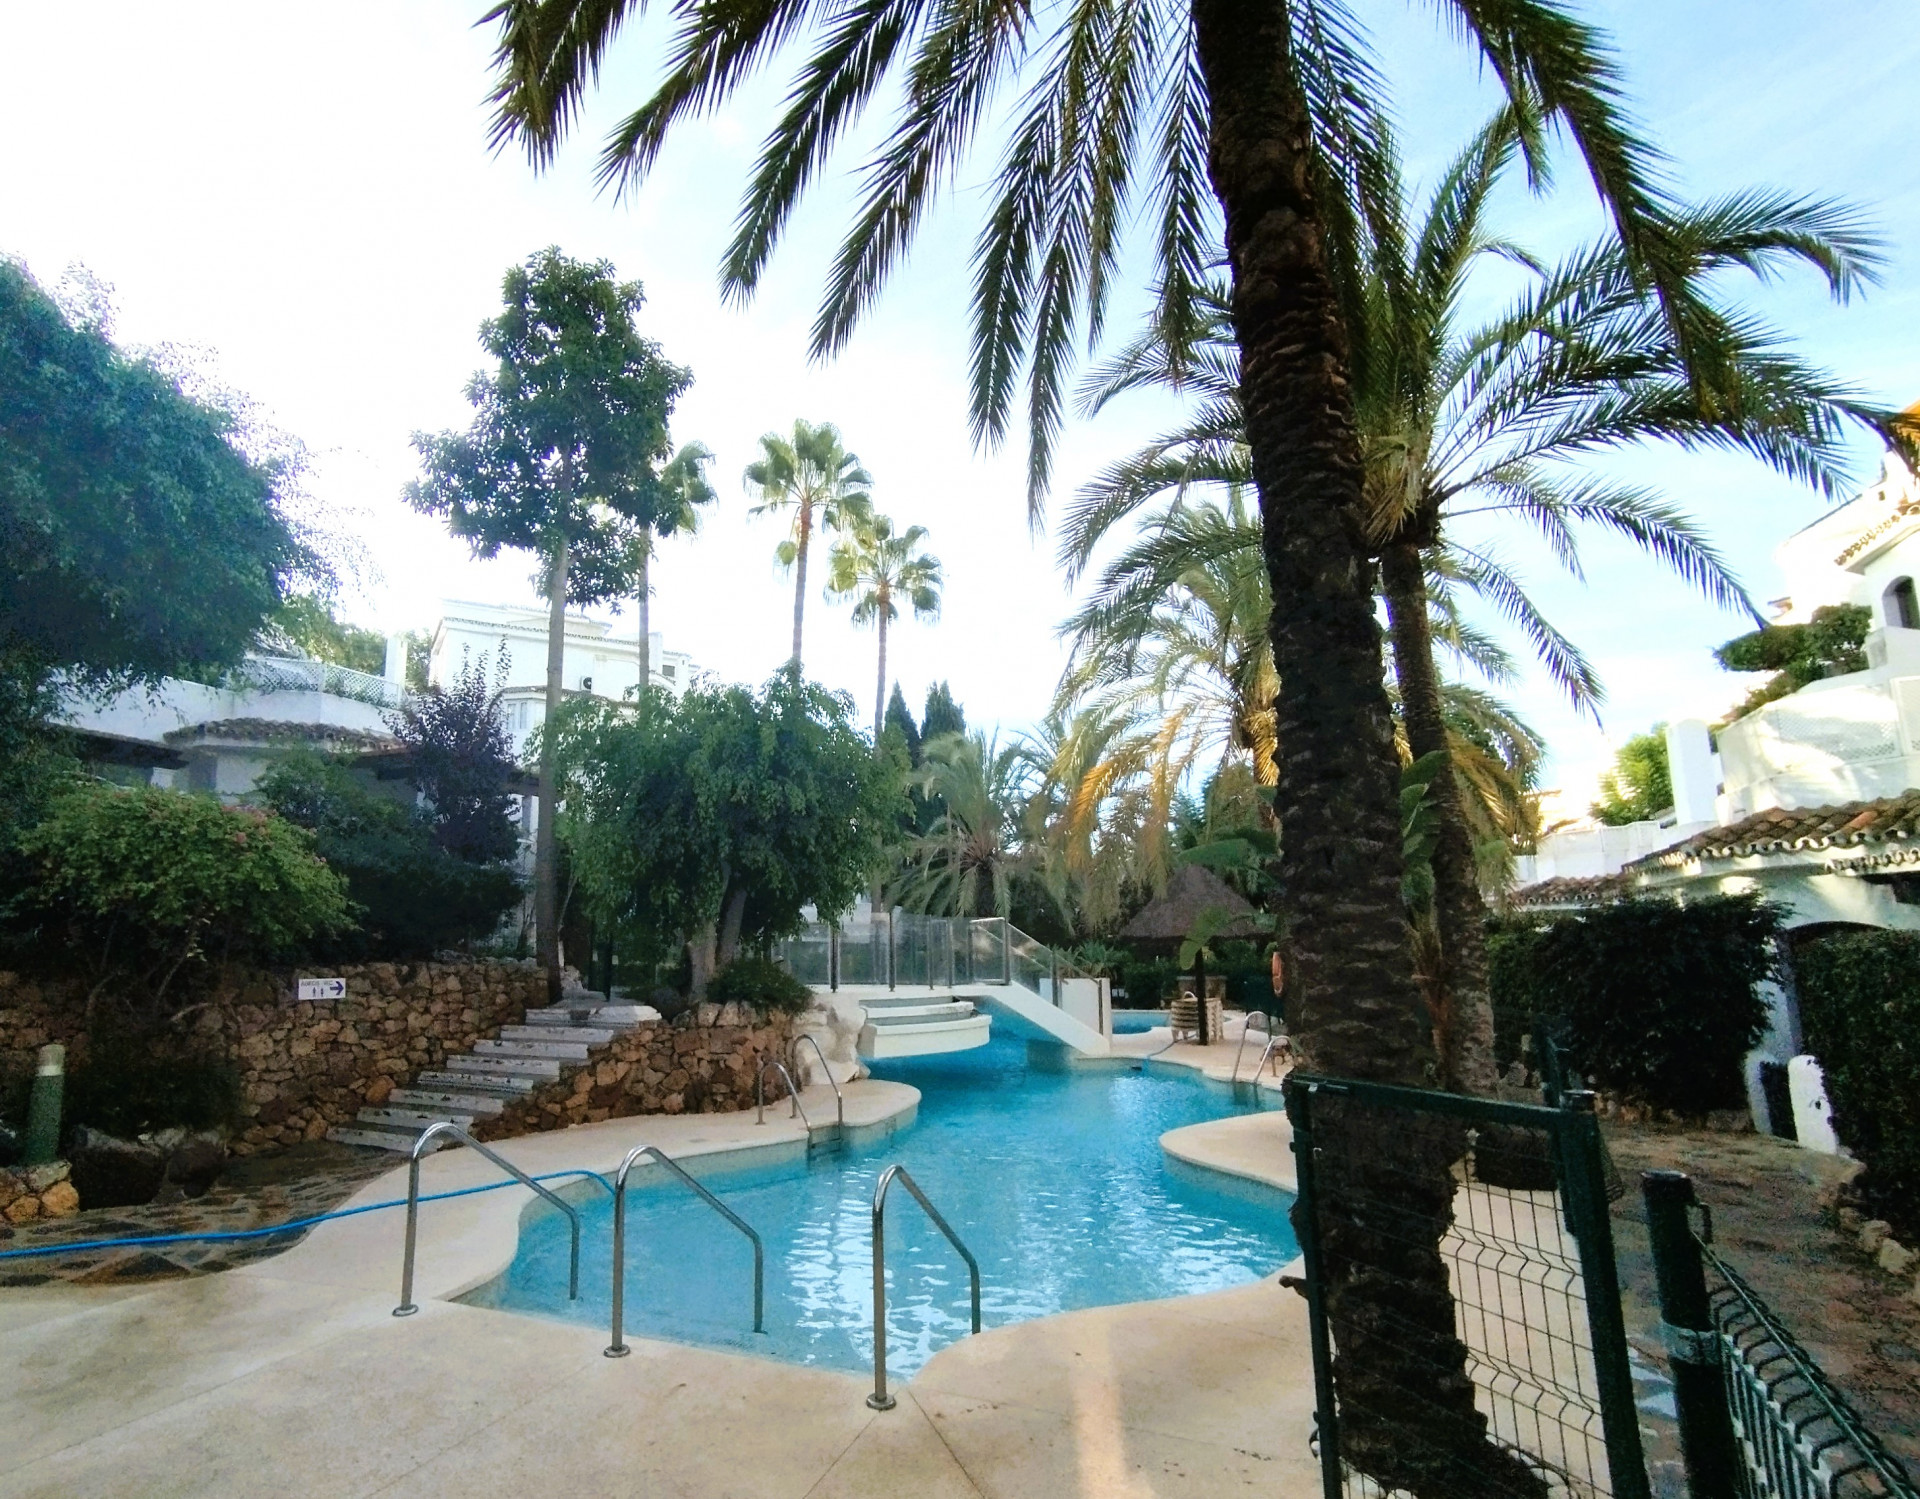 Apartment for Sale in Golden Beach, meters from the beach ... living Marbella...